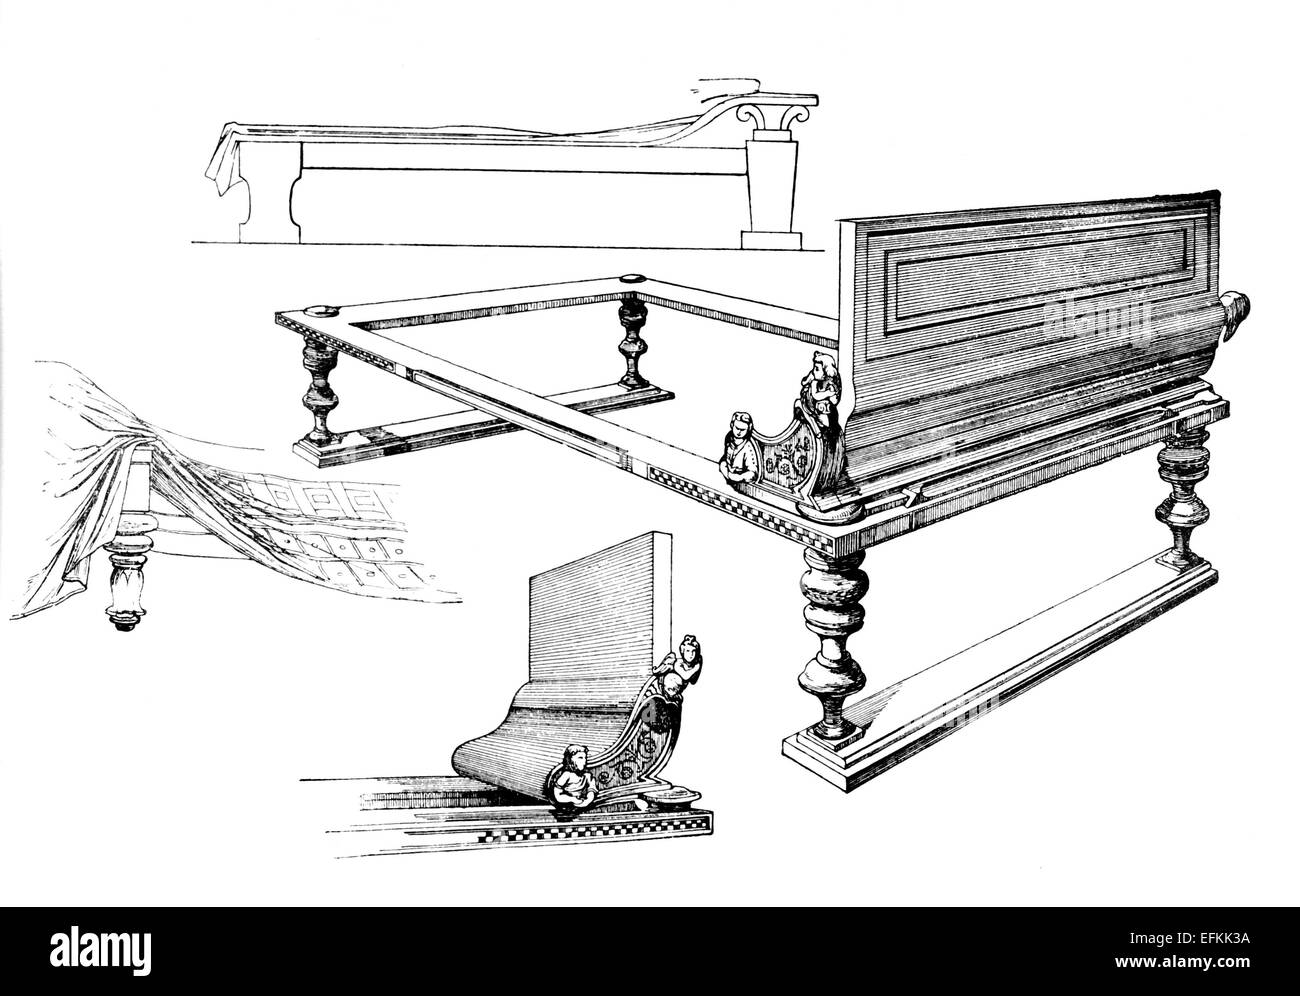 Victorian engraving of the design of classical Greek couches. Digitally restored image from a mid-19th century Encyclopaedia. Stock Photo